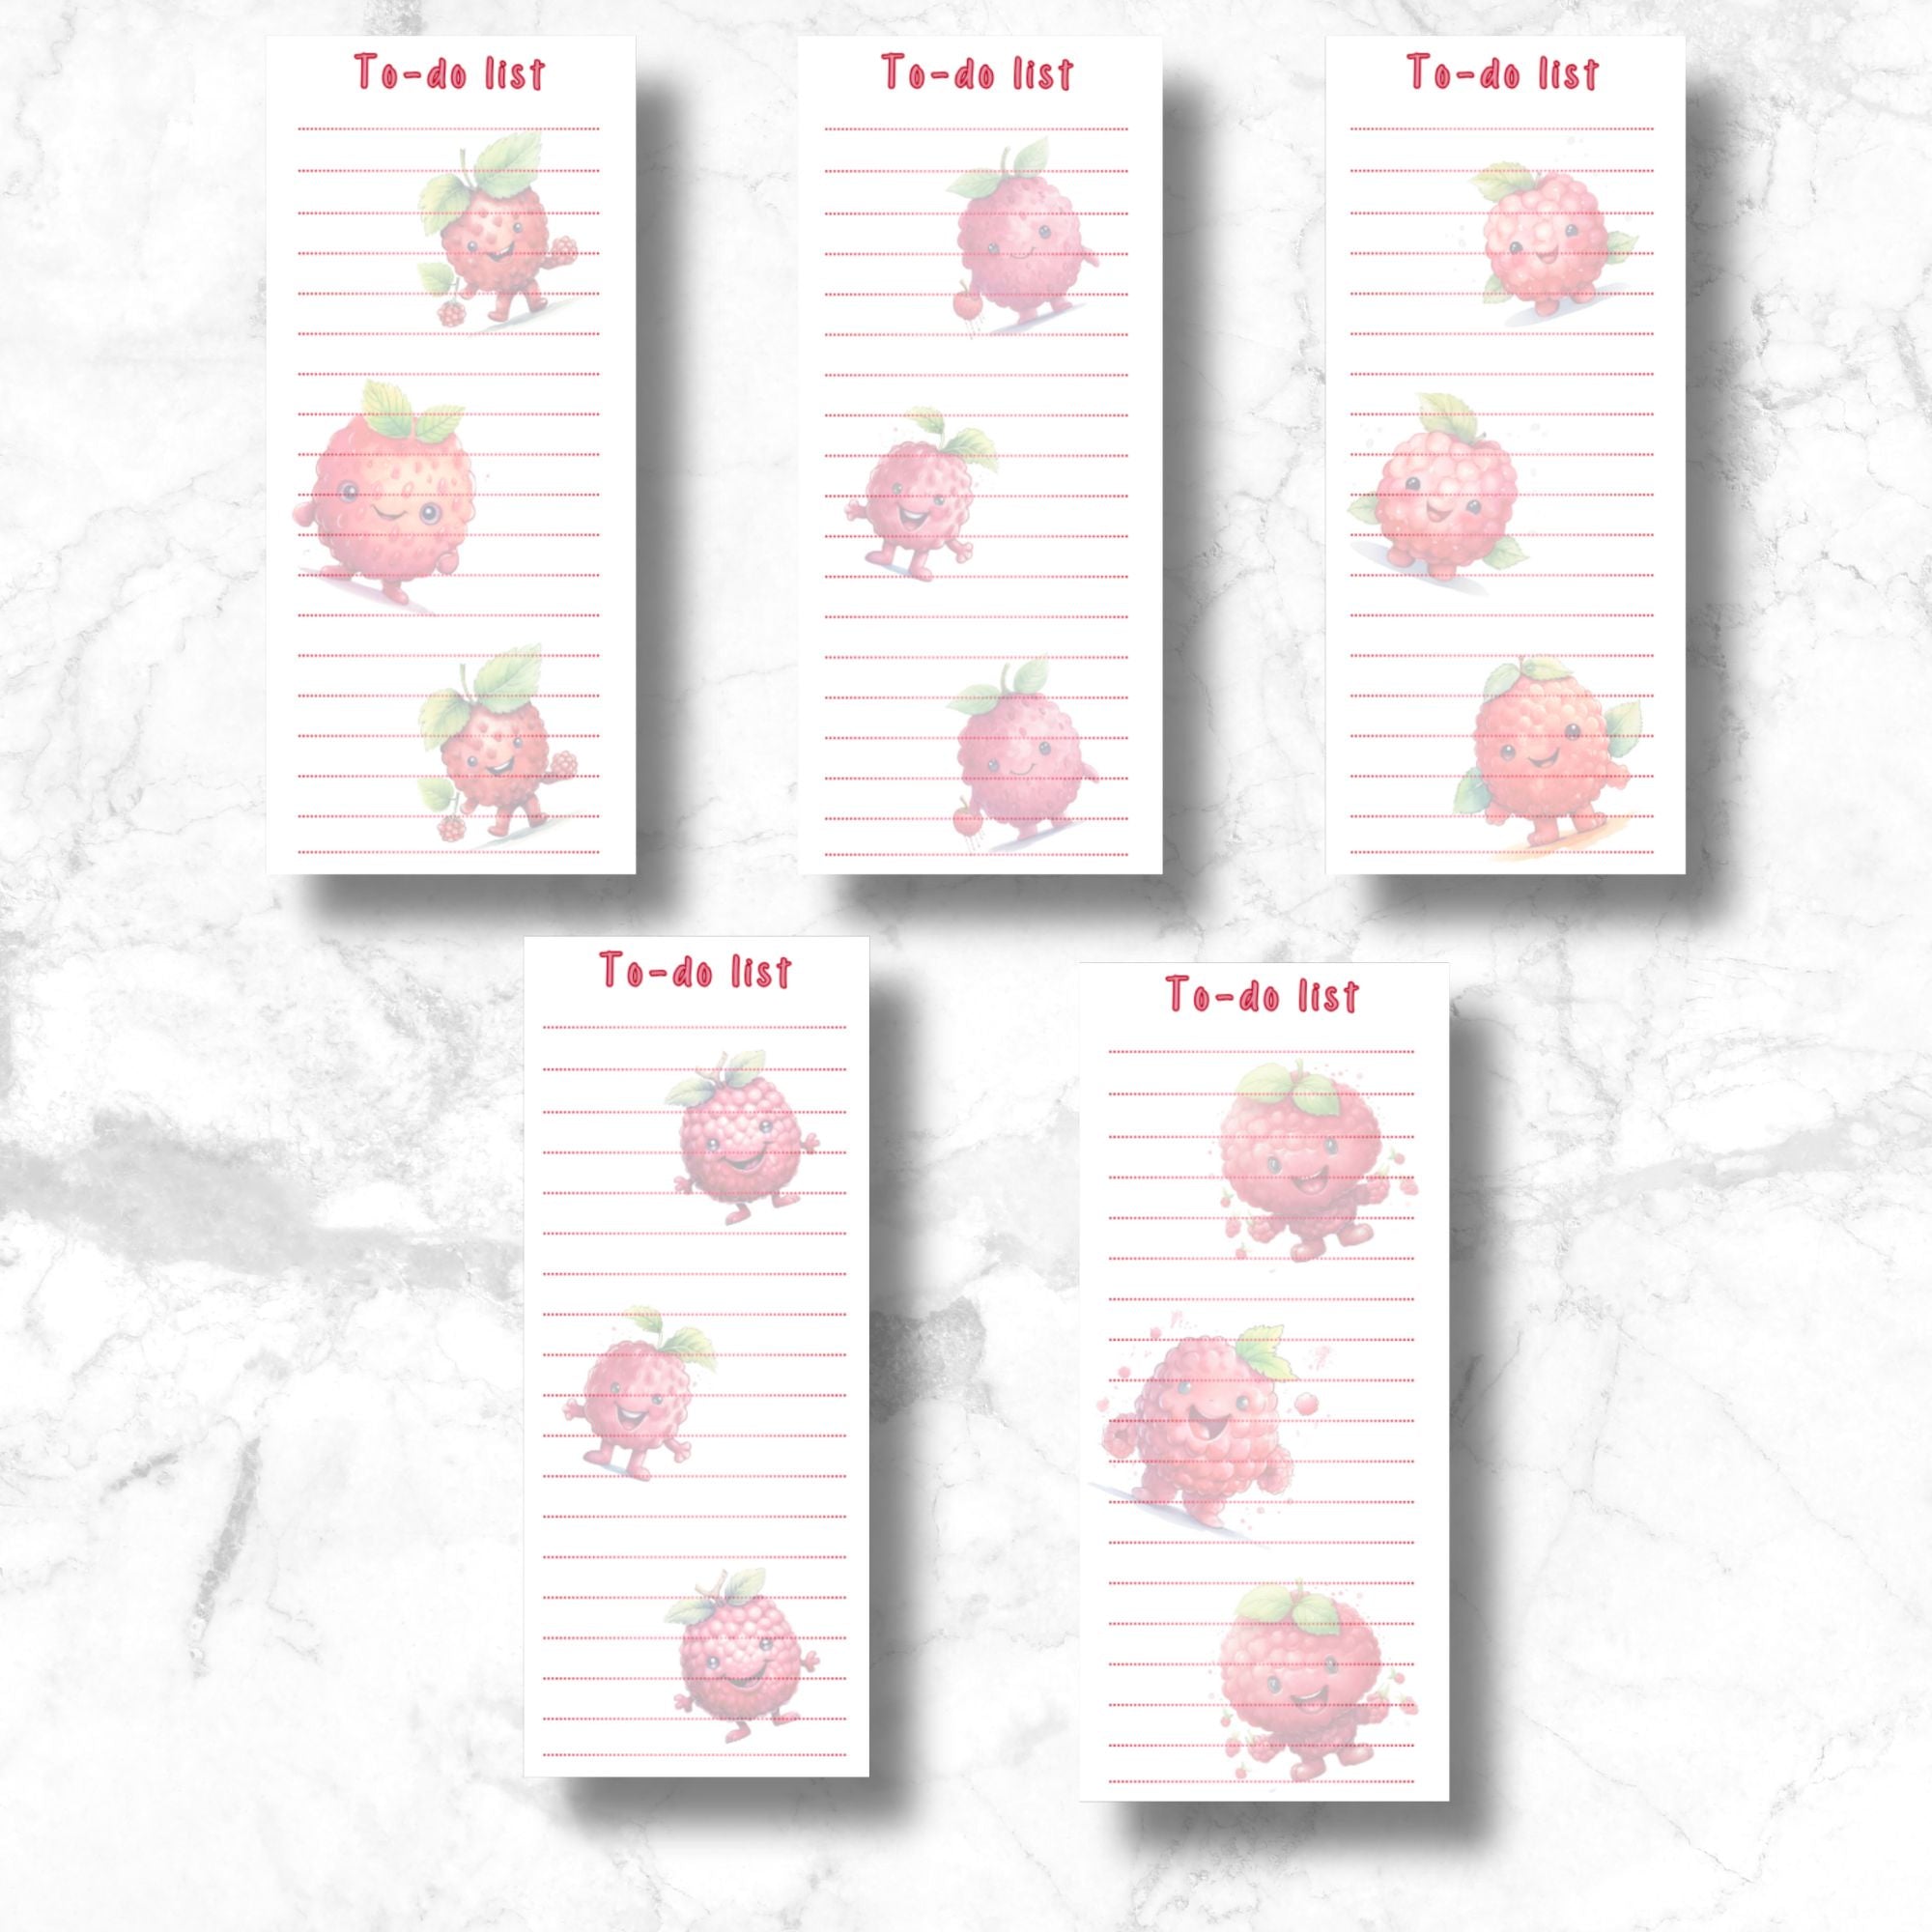 This image shows the 5 different designs included in the To-Do List Notepad - Raspberry.